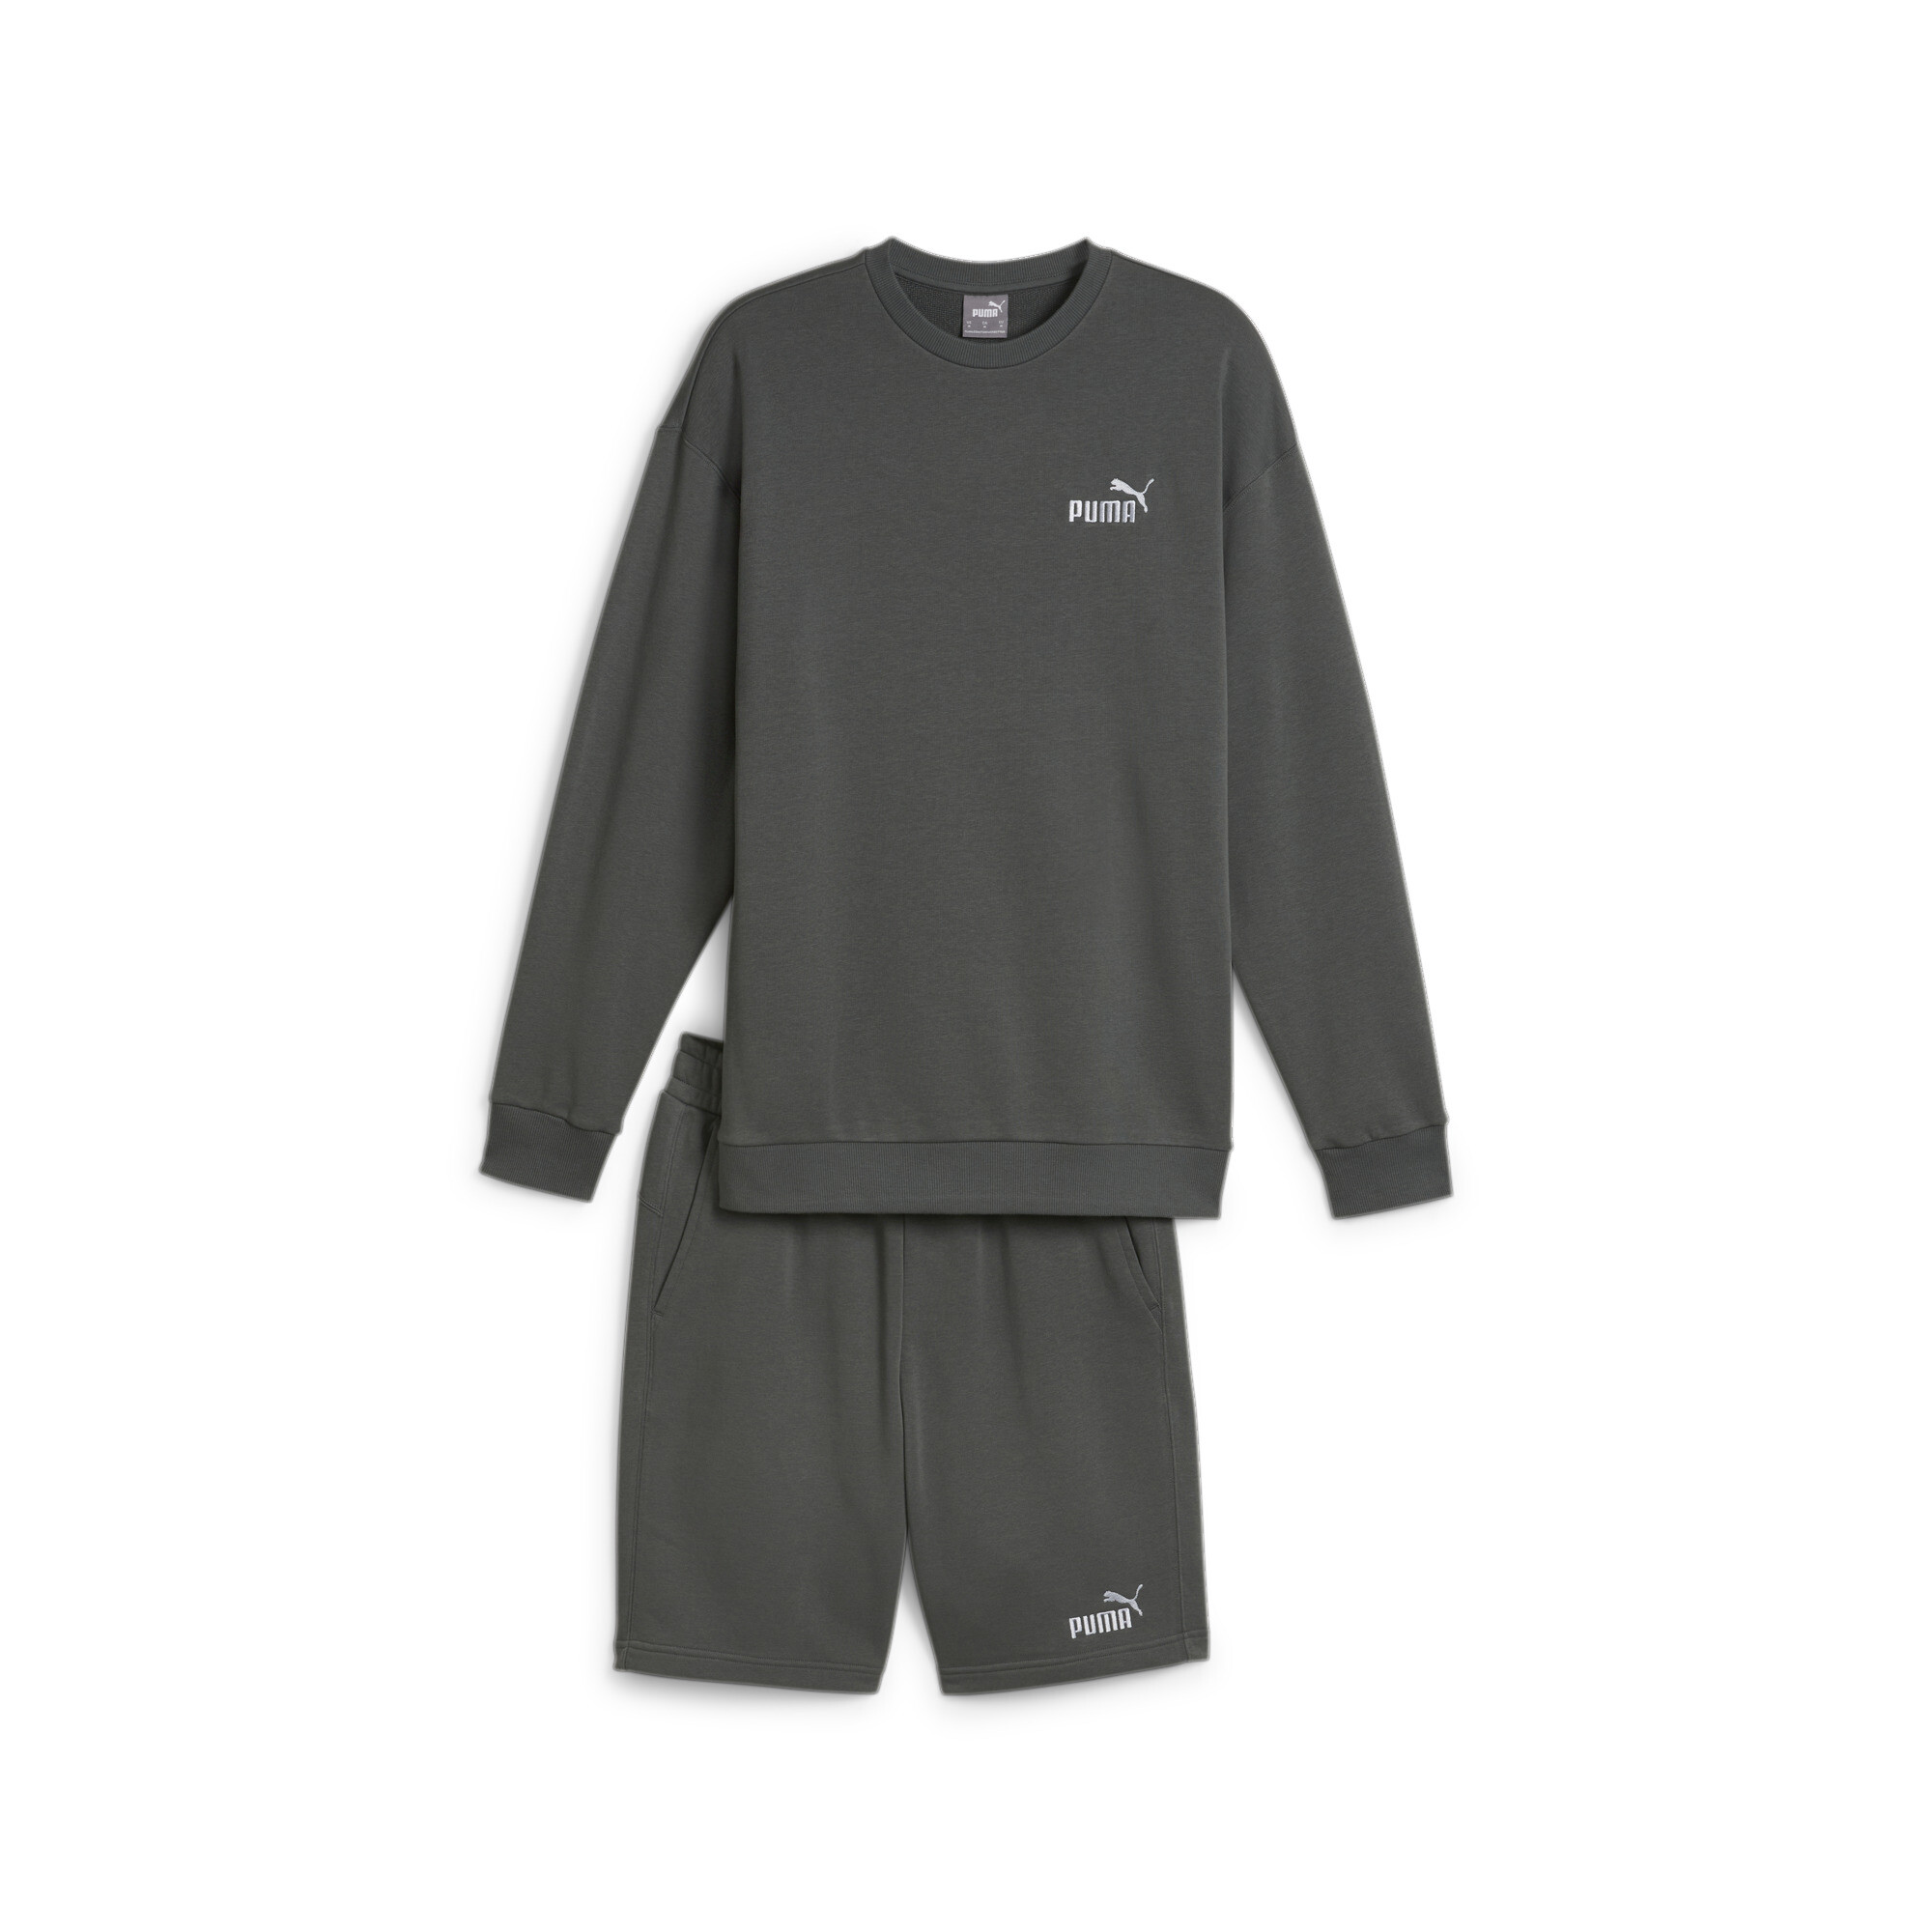 Men's Puma Relaxed Sweatsuit, Gray, Size XS, Clothing